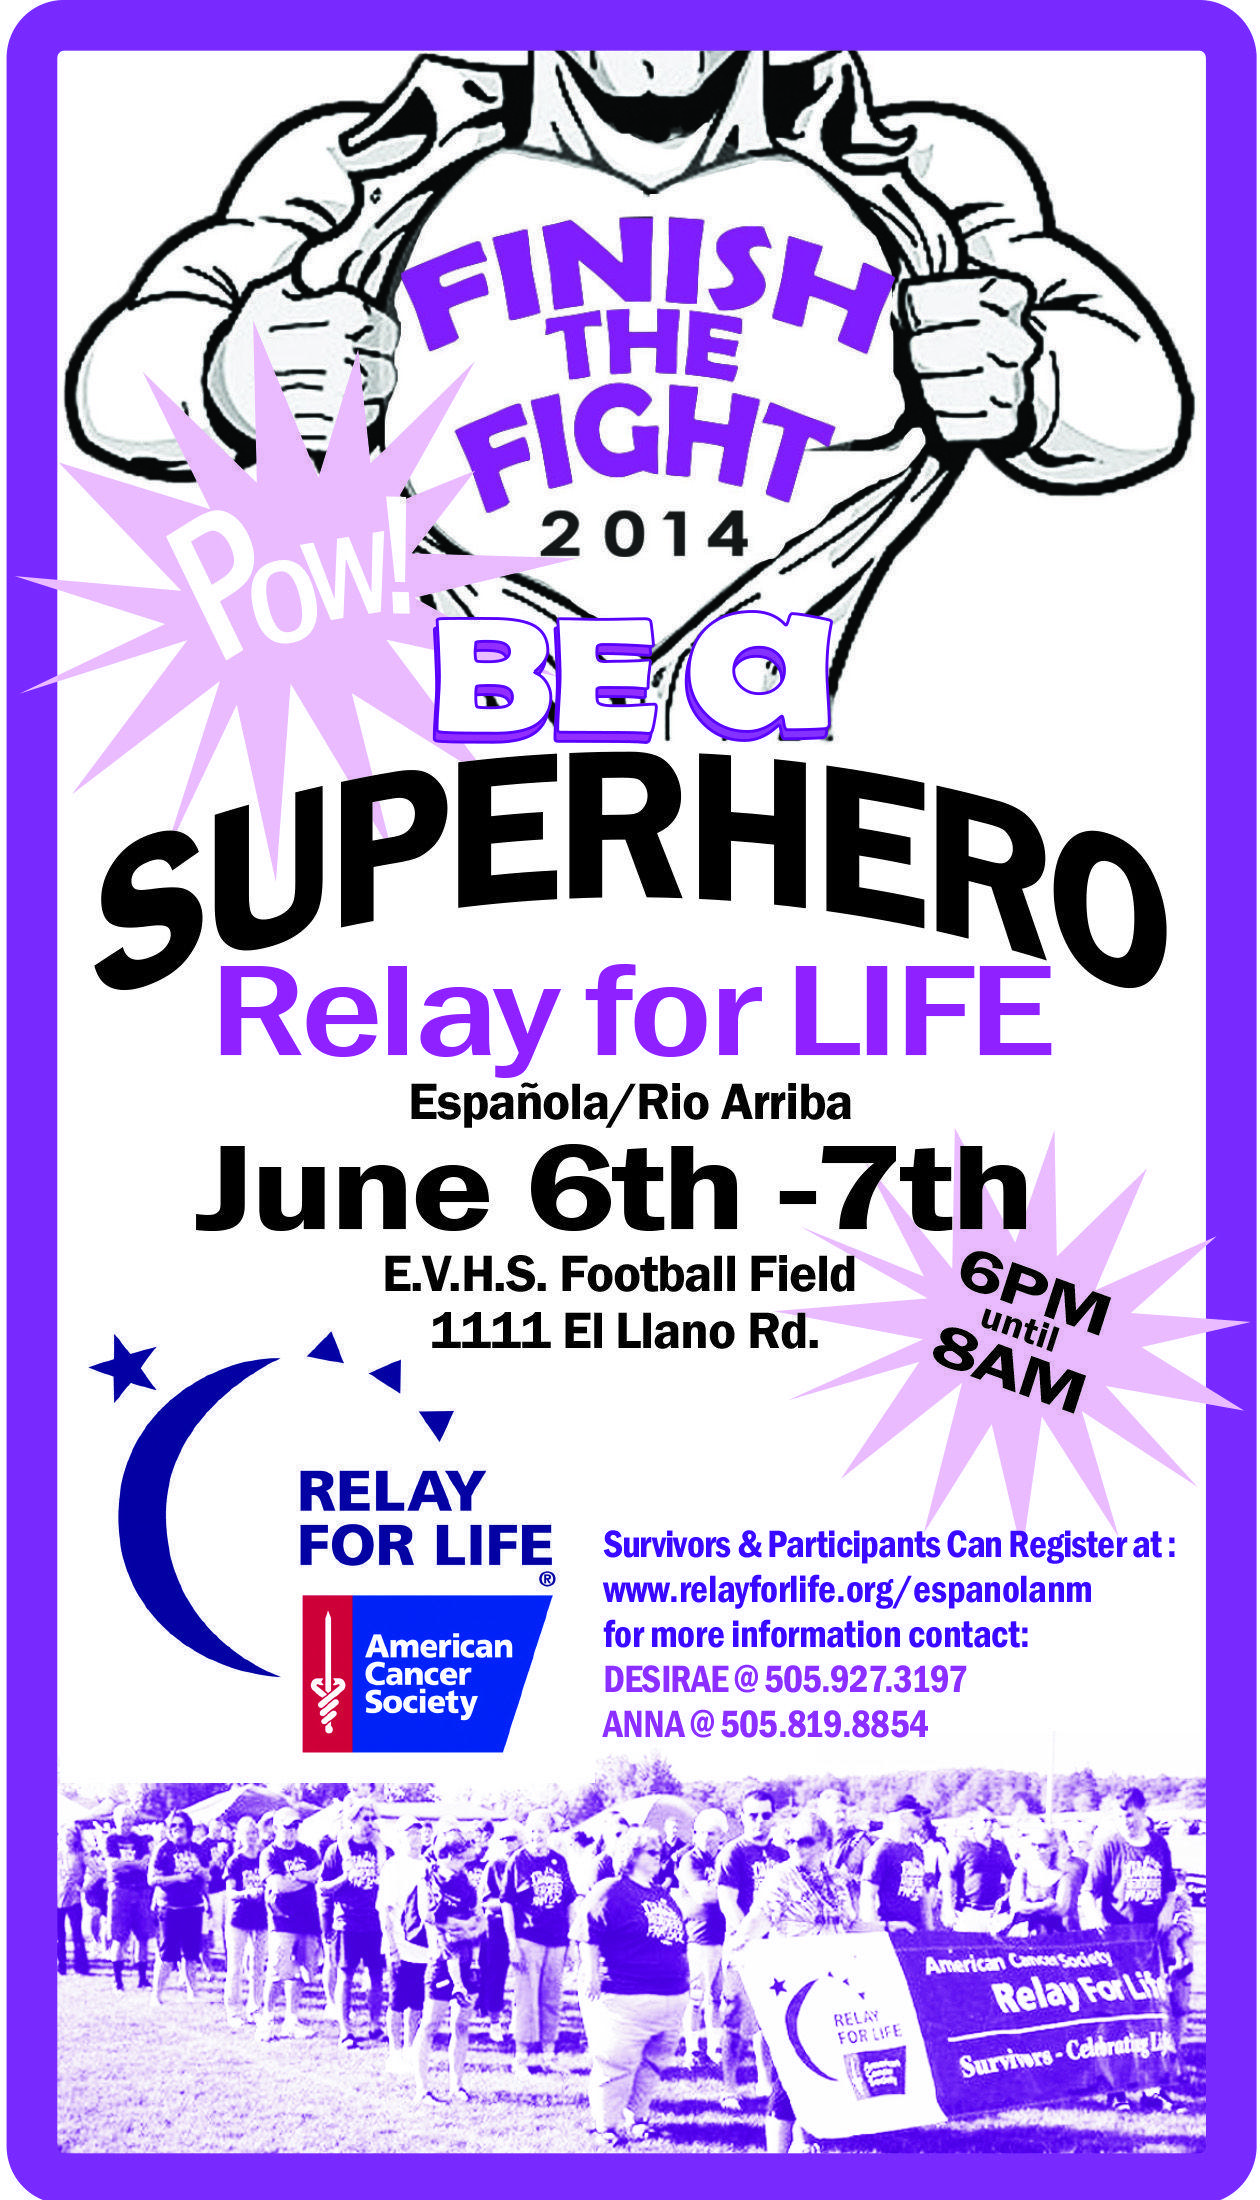 Relay for Life Superhero Logo - Relay for Life, (superhero themed) advertisement for the local ...